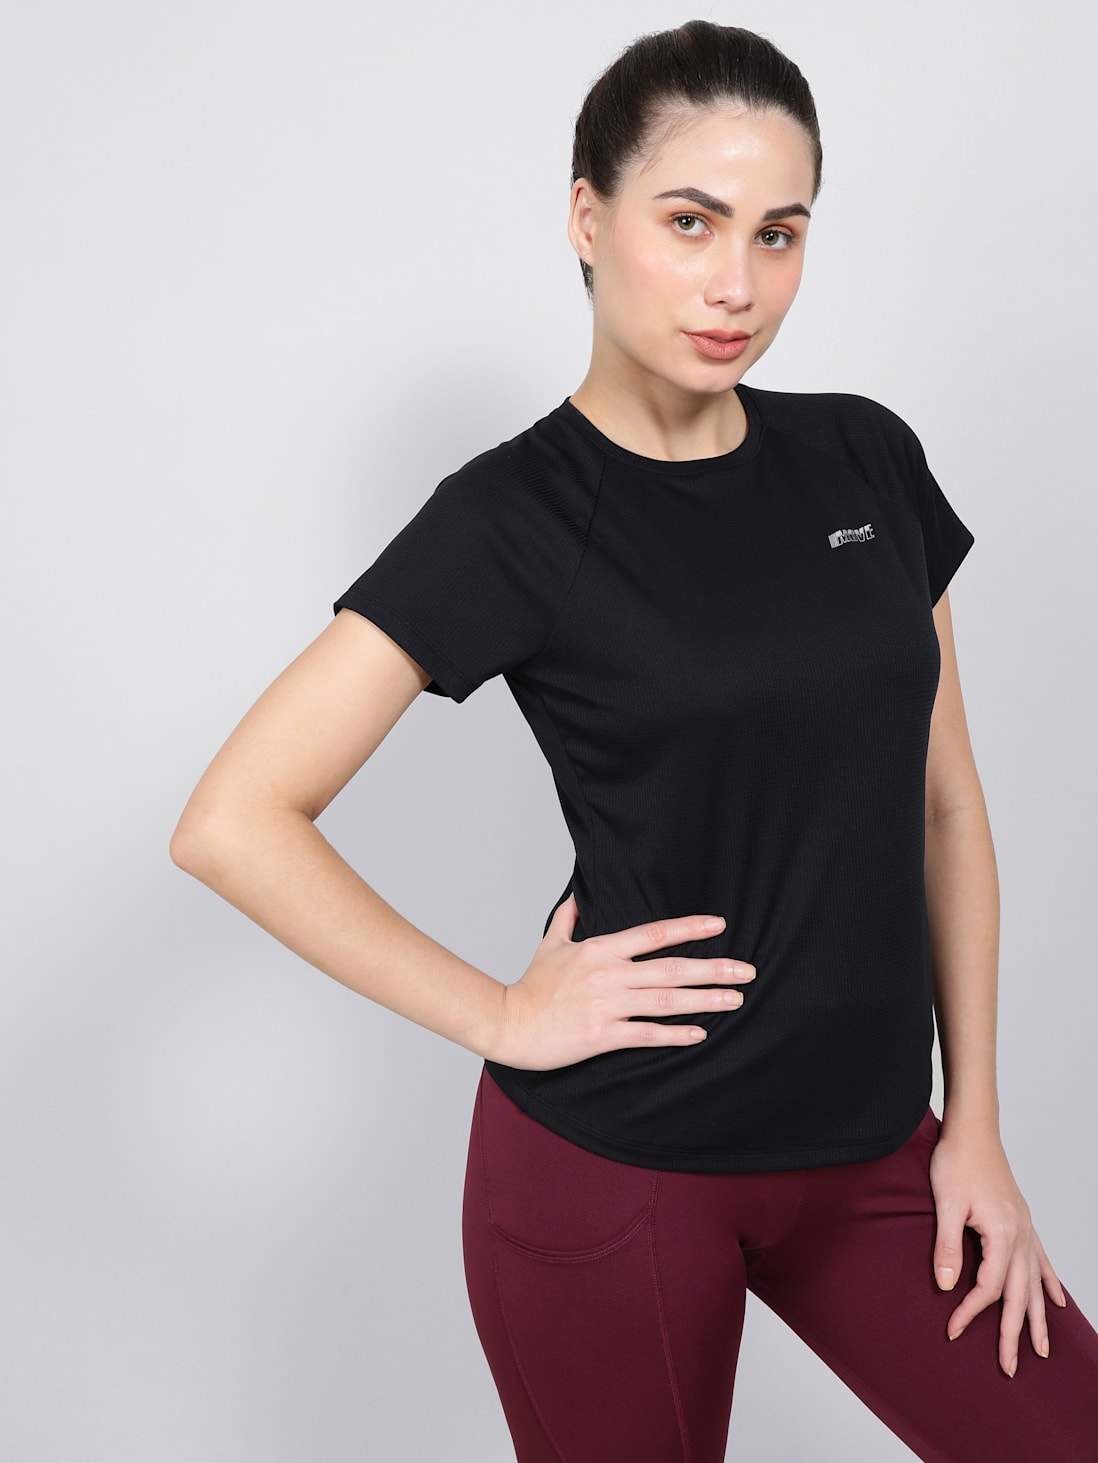 Buy Women's Microfiber Fabric Relaxed Fit Half Sleeve T-Shirt with ...